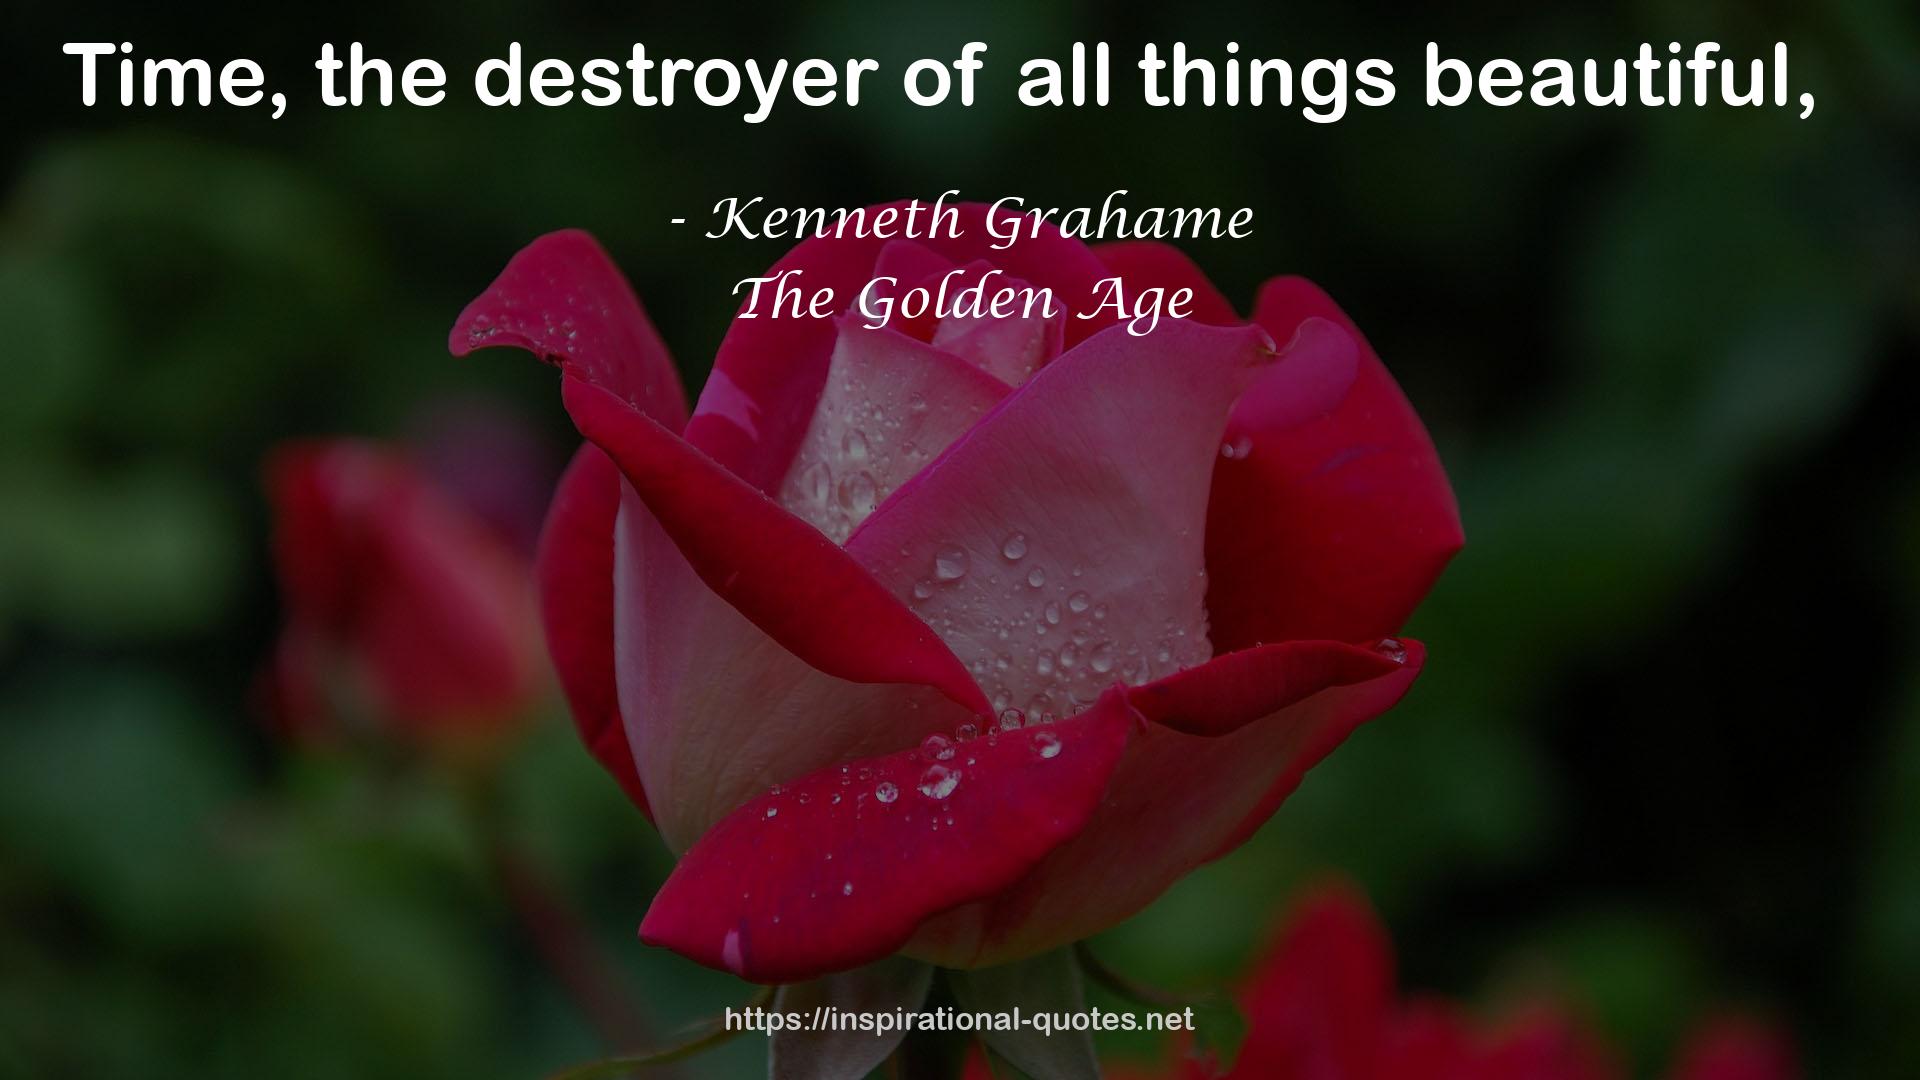 Kenneth Grahame QUOTES